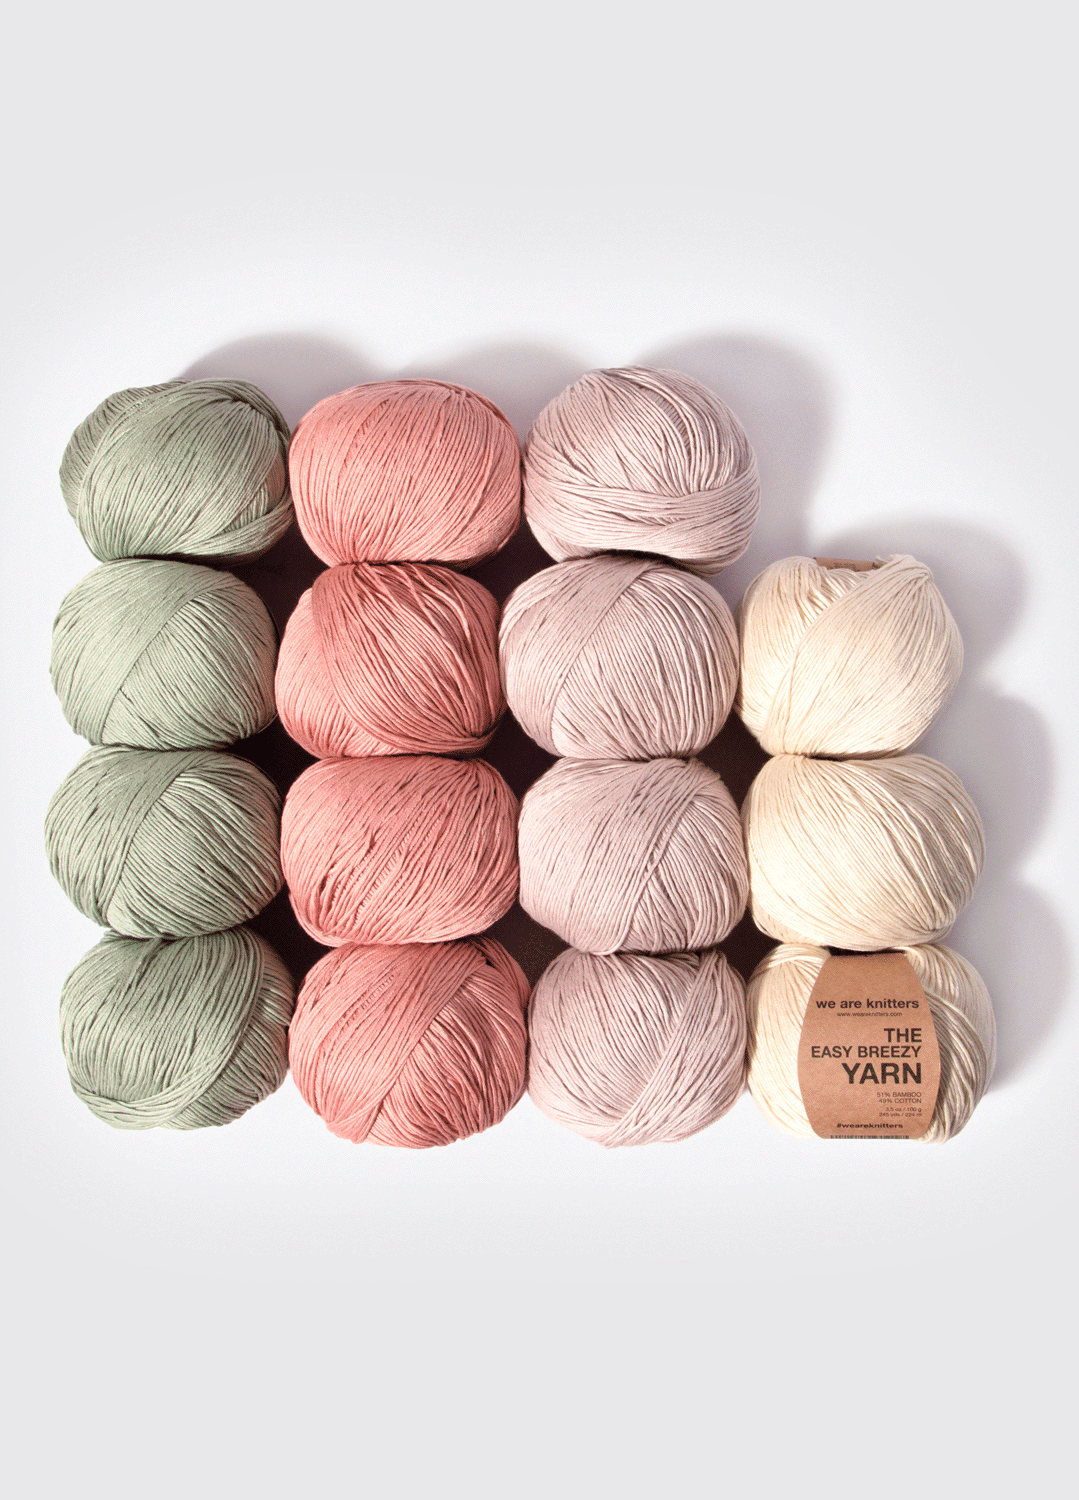 15 Pack of The Easy Breezy Yarn Balls